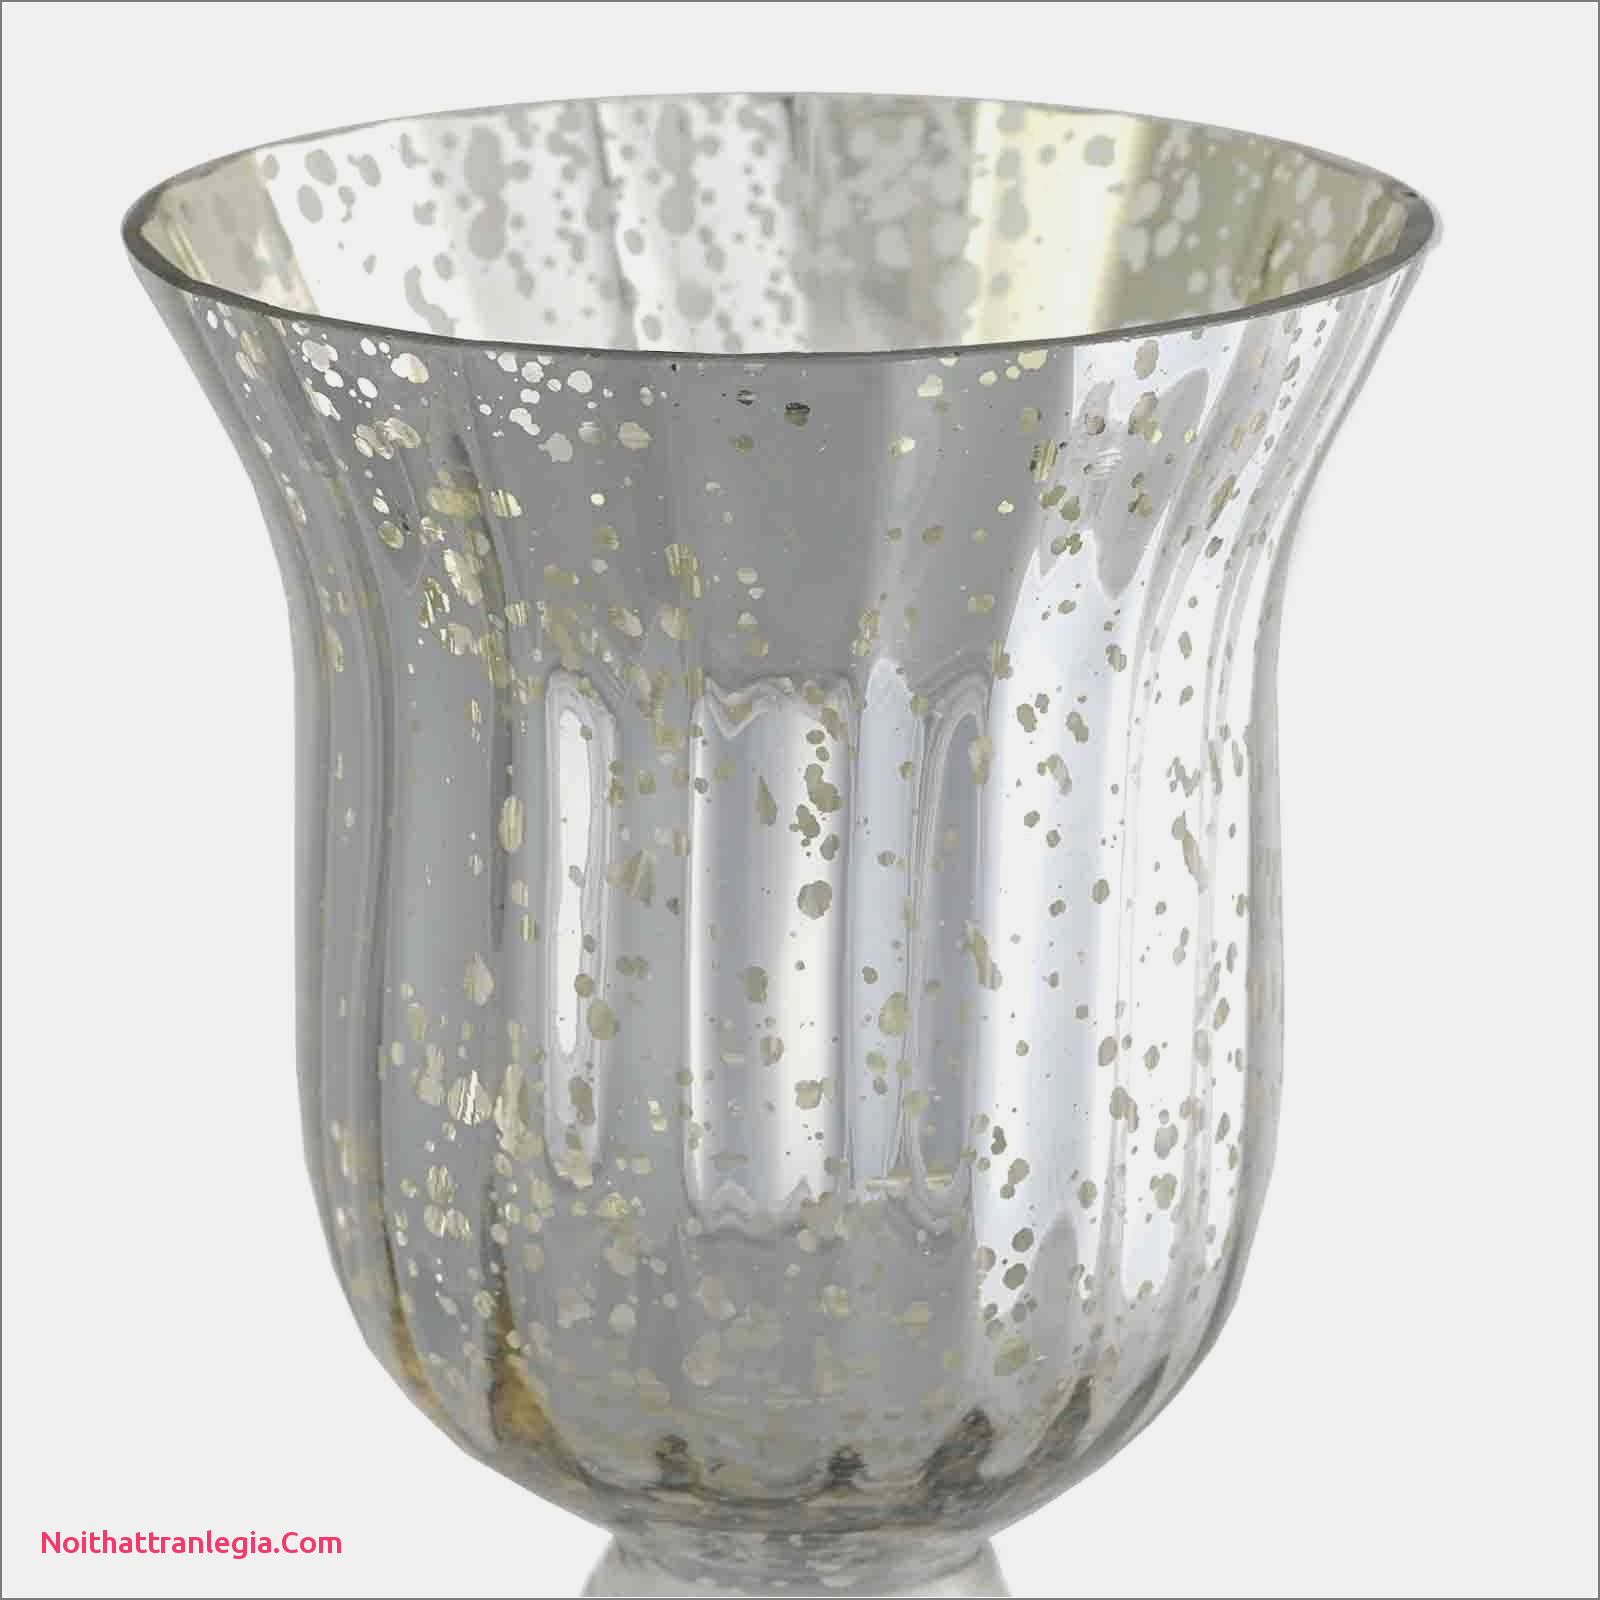 24 Unique Tall Vases for Sale 2022 free download tall vases for sale of 20 wedding vases noithattranlegia vases design intended for wedding guest gift ideas inspirational candles for wedding favors superb pe s5h vases candle vase i